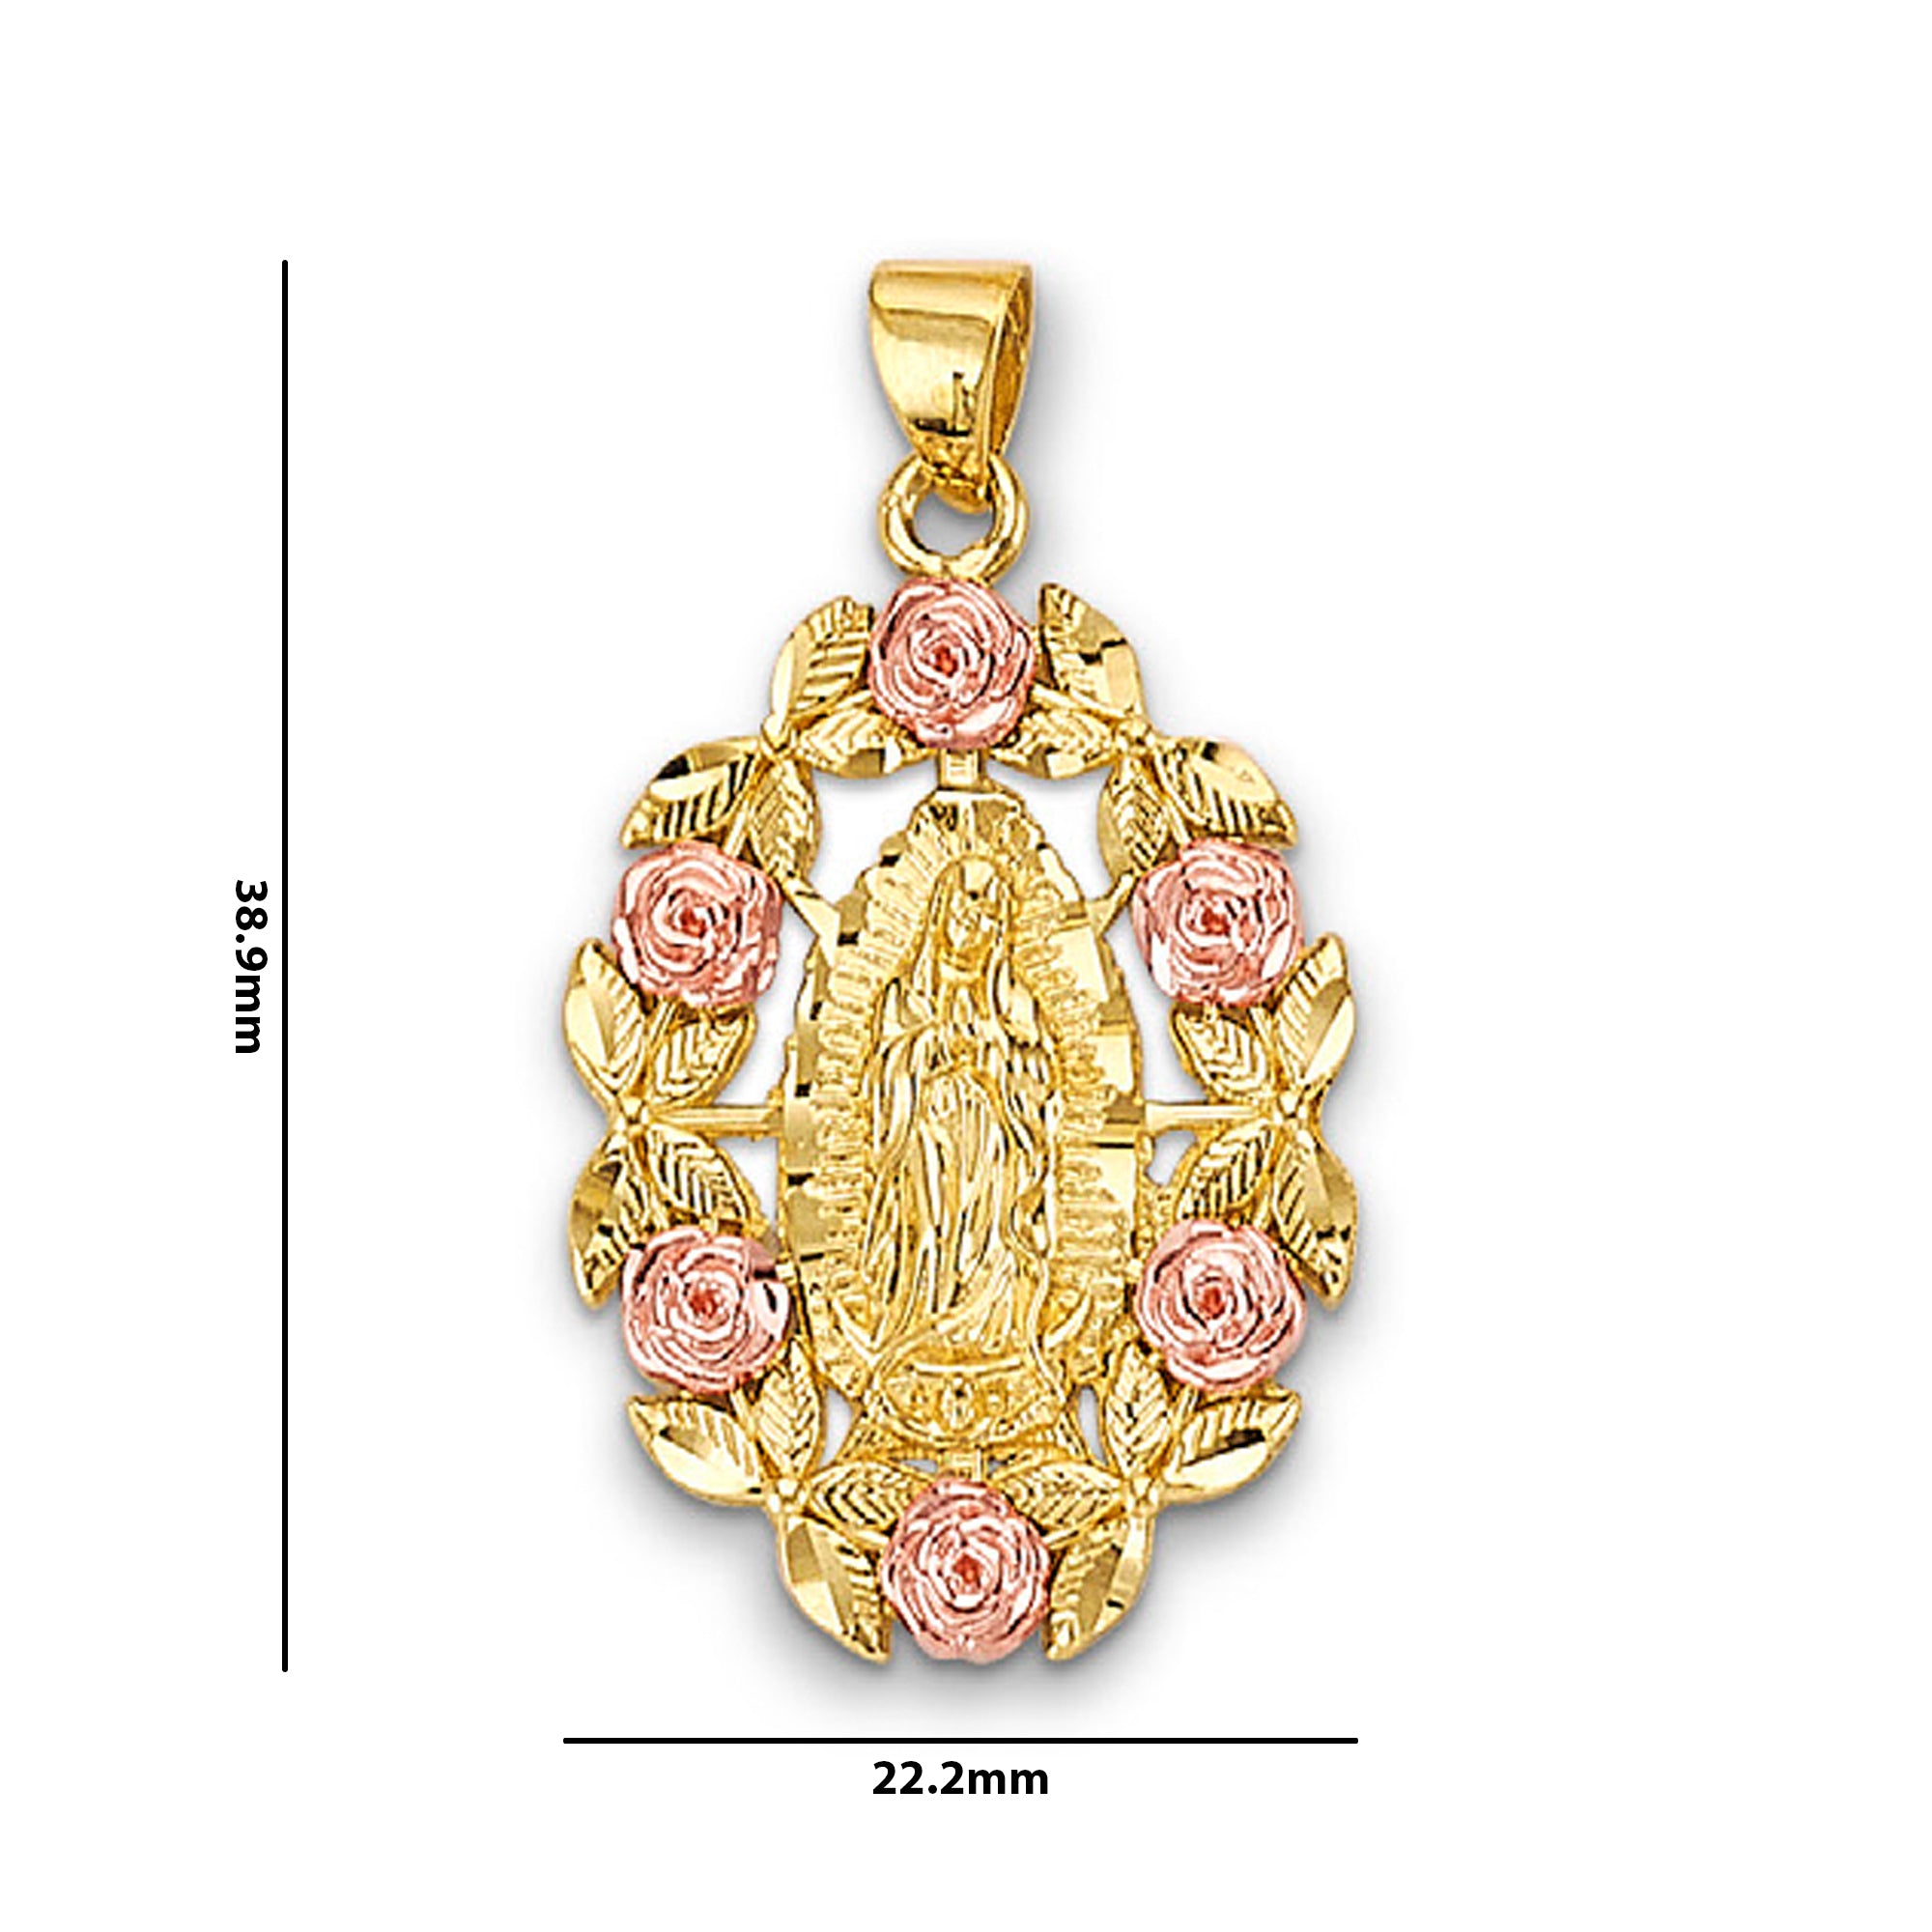 Two Tone Gold Rose Border Lady of Guadalupe Religious Pendant with Measurement